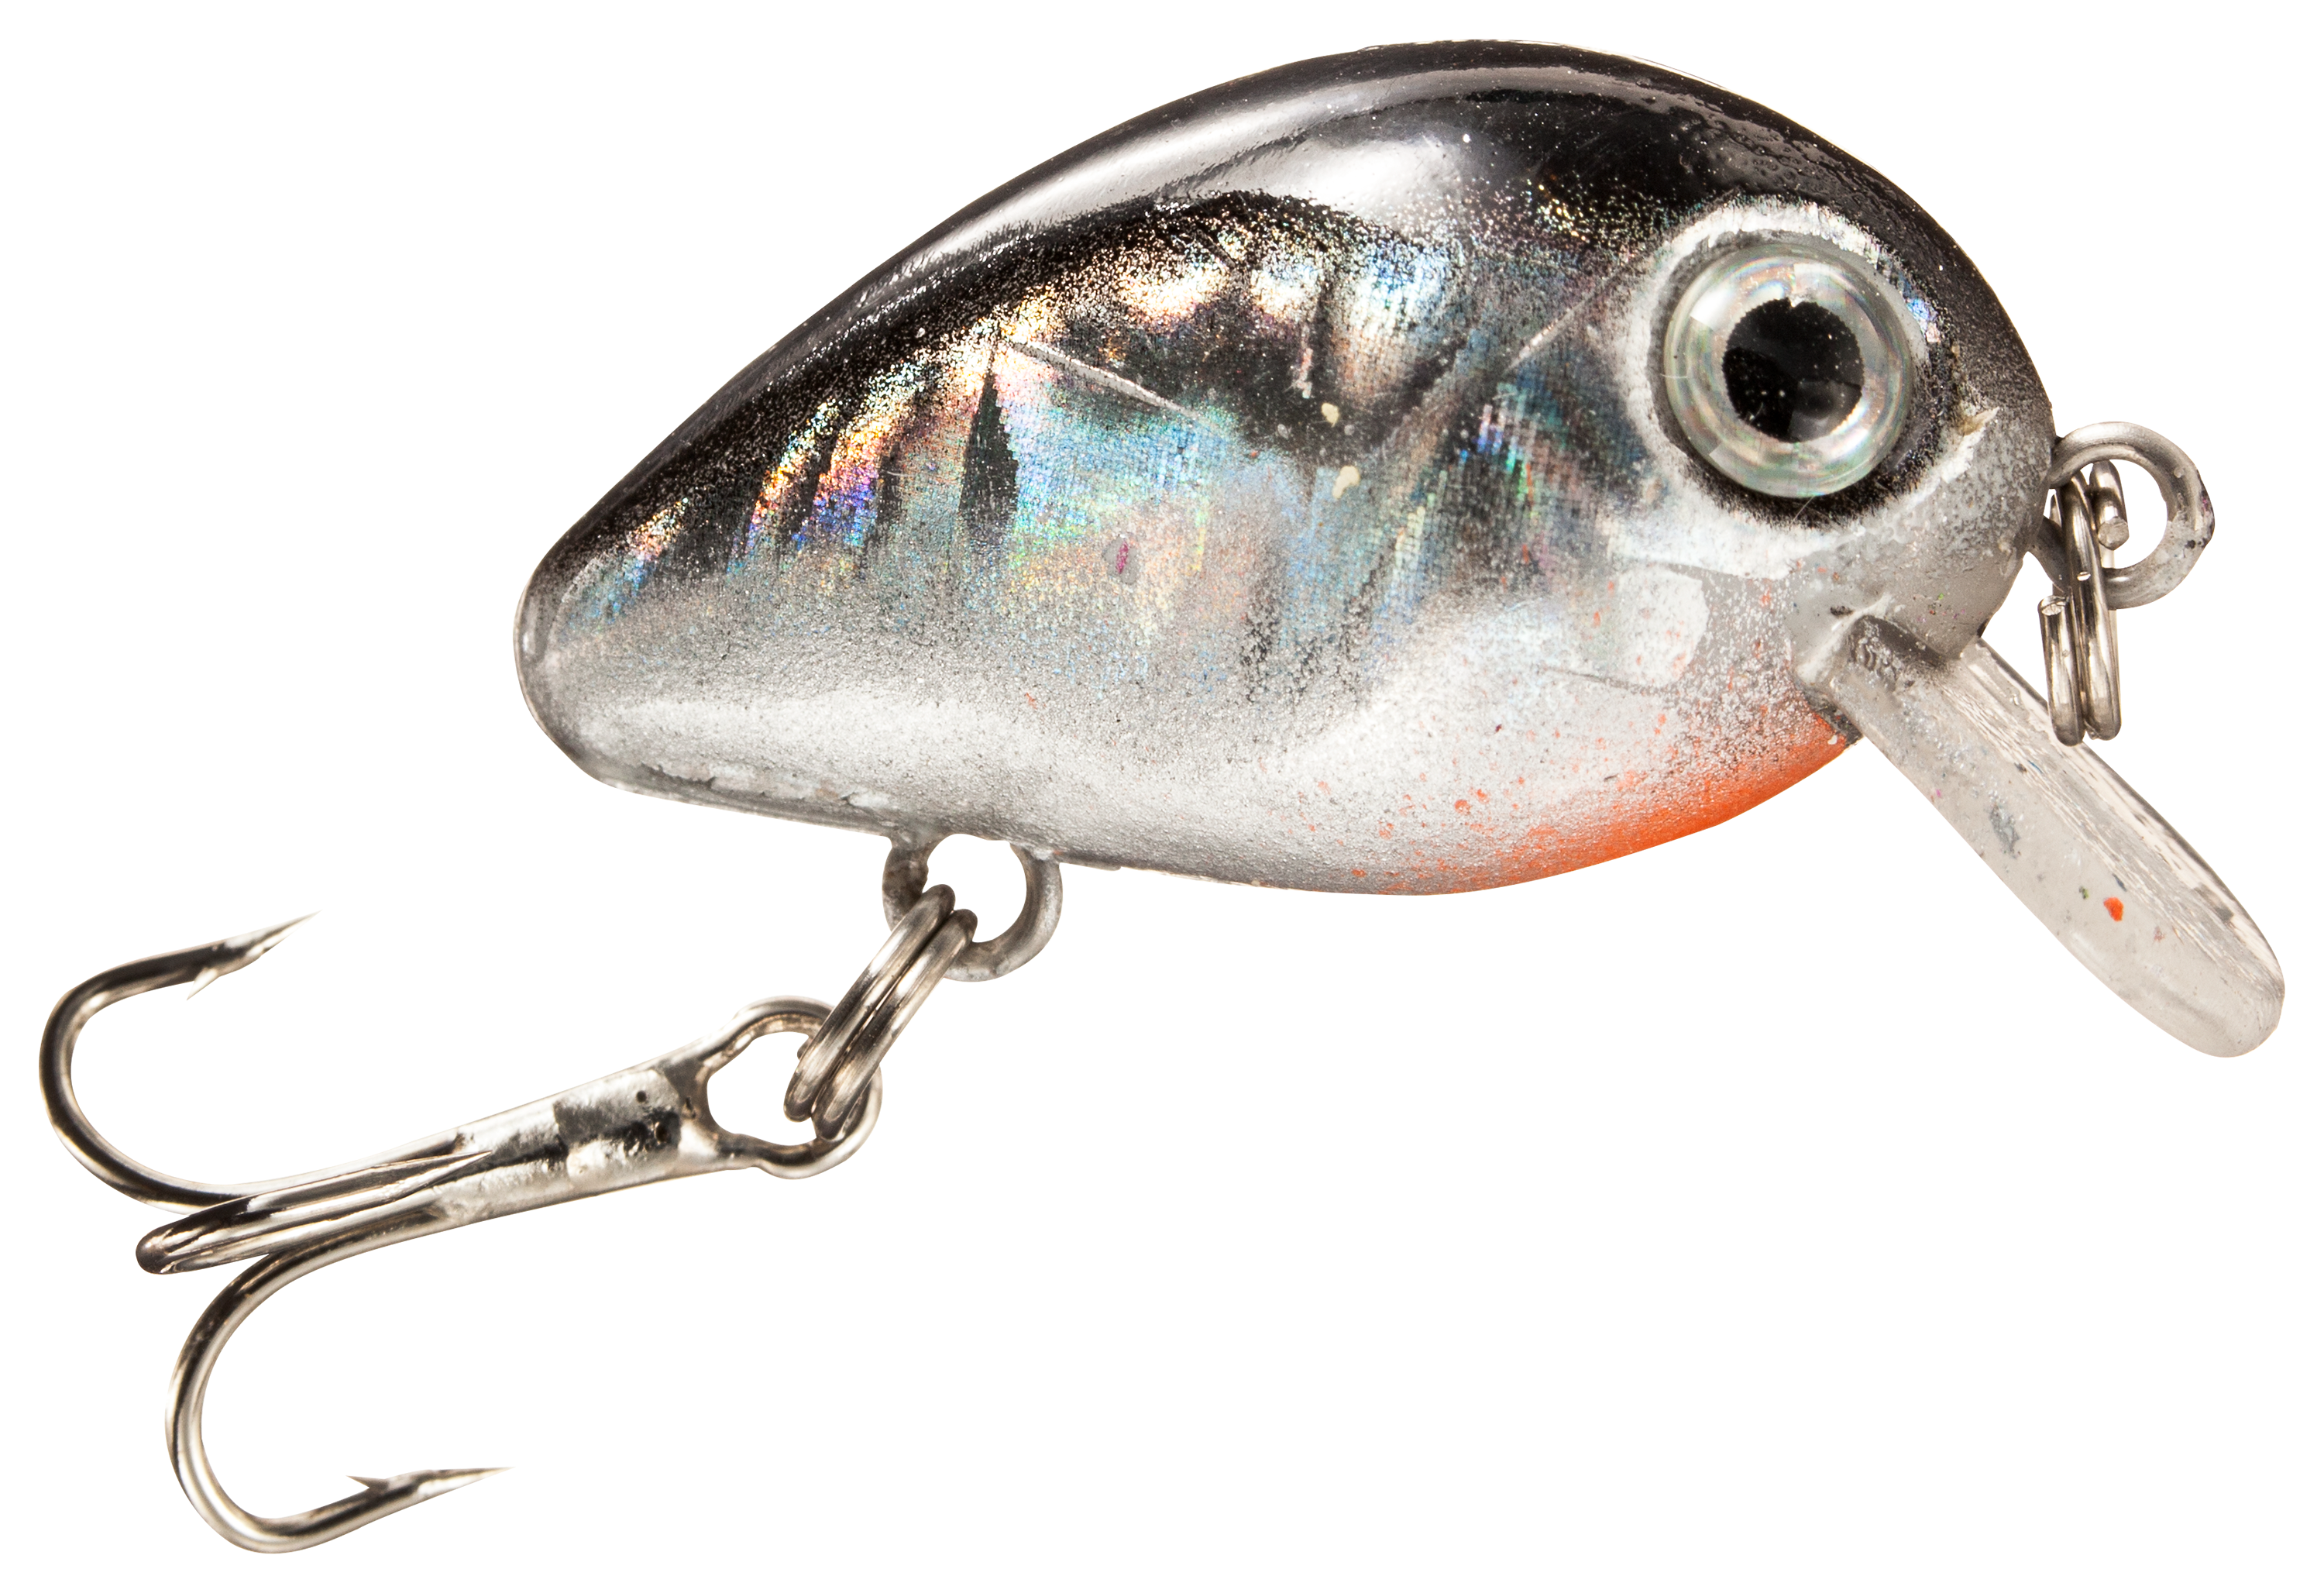 Shallow Diving Crankbaits (0'-5') – Natural Sports - The Fishing Store